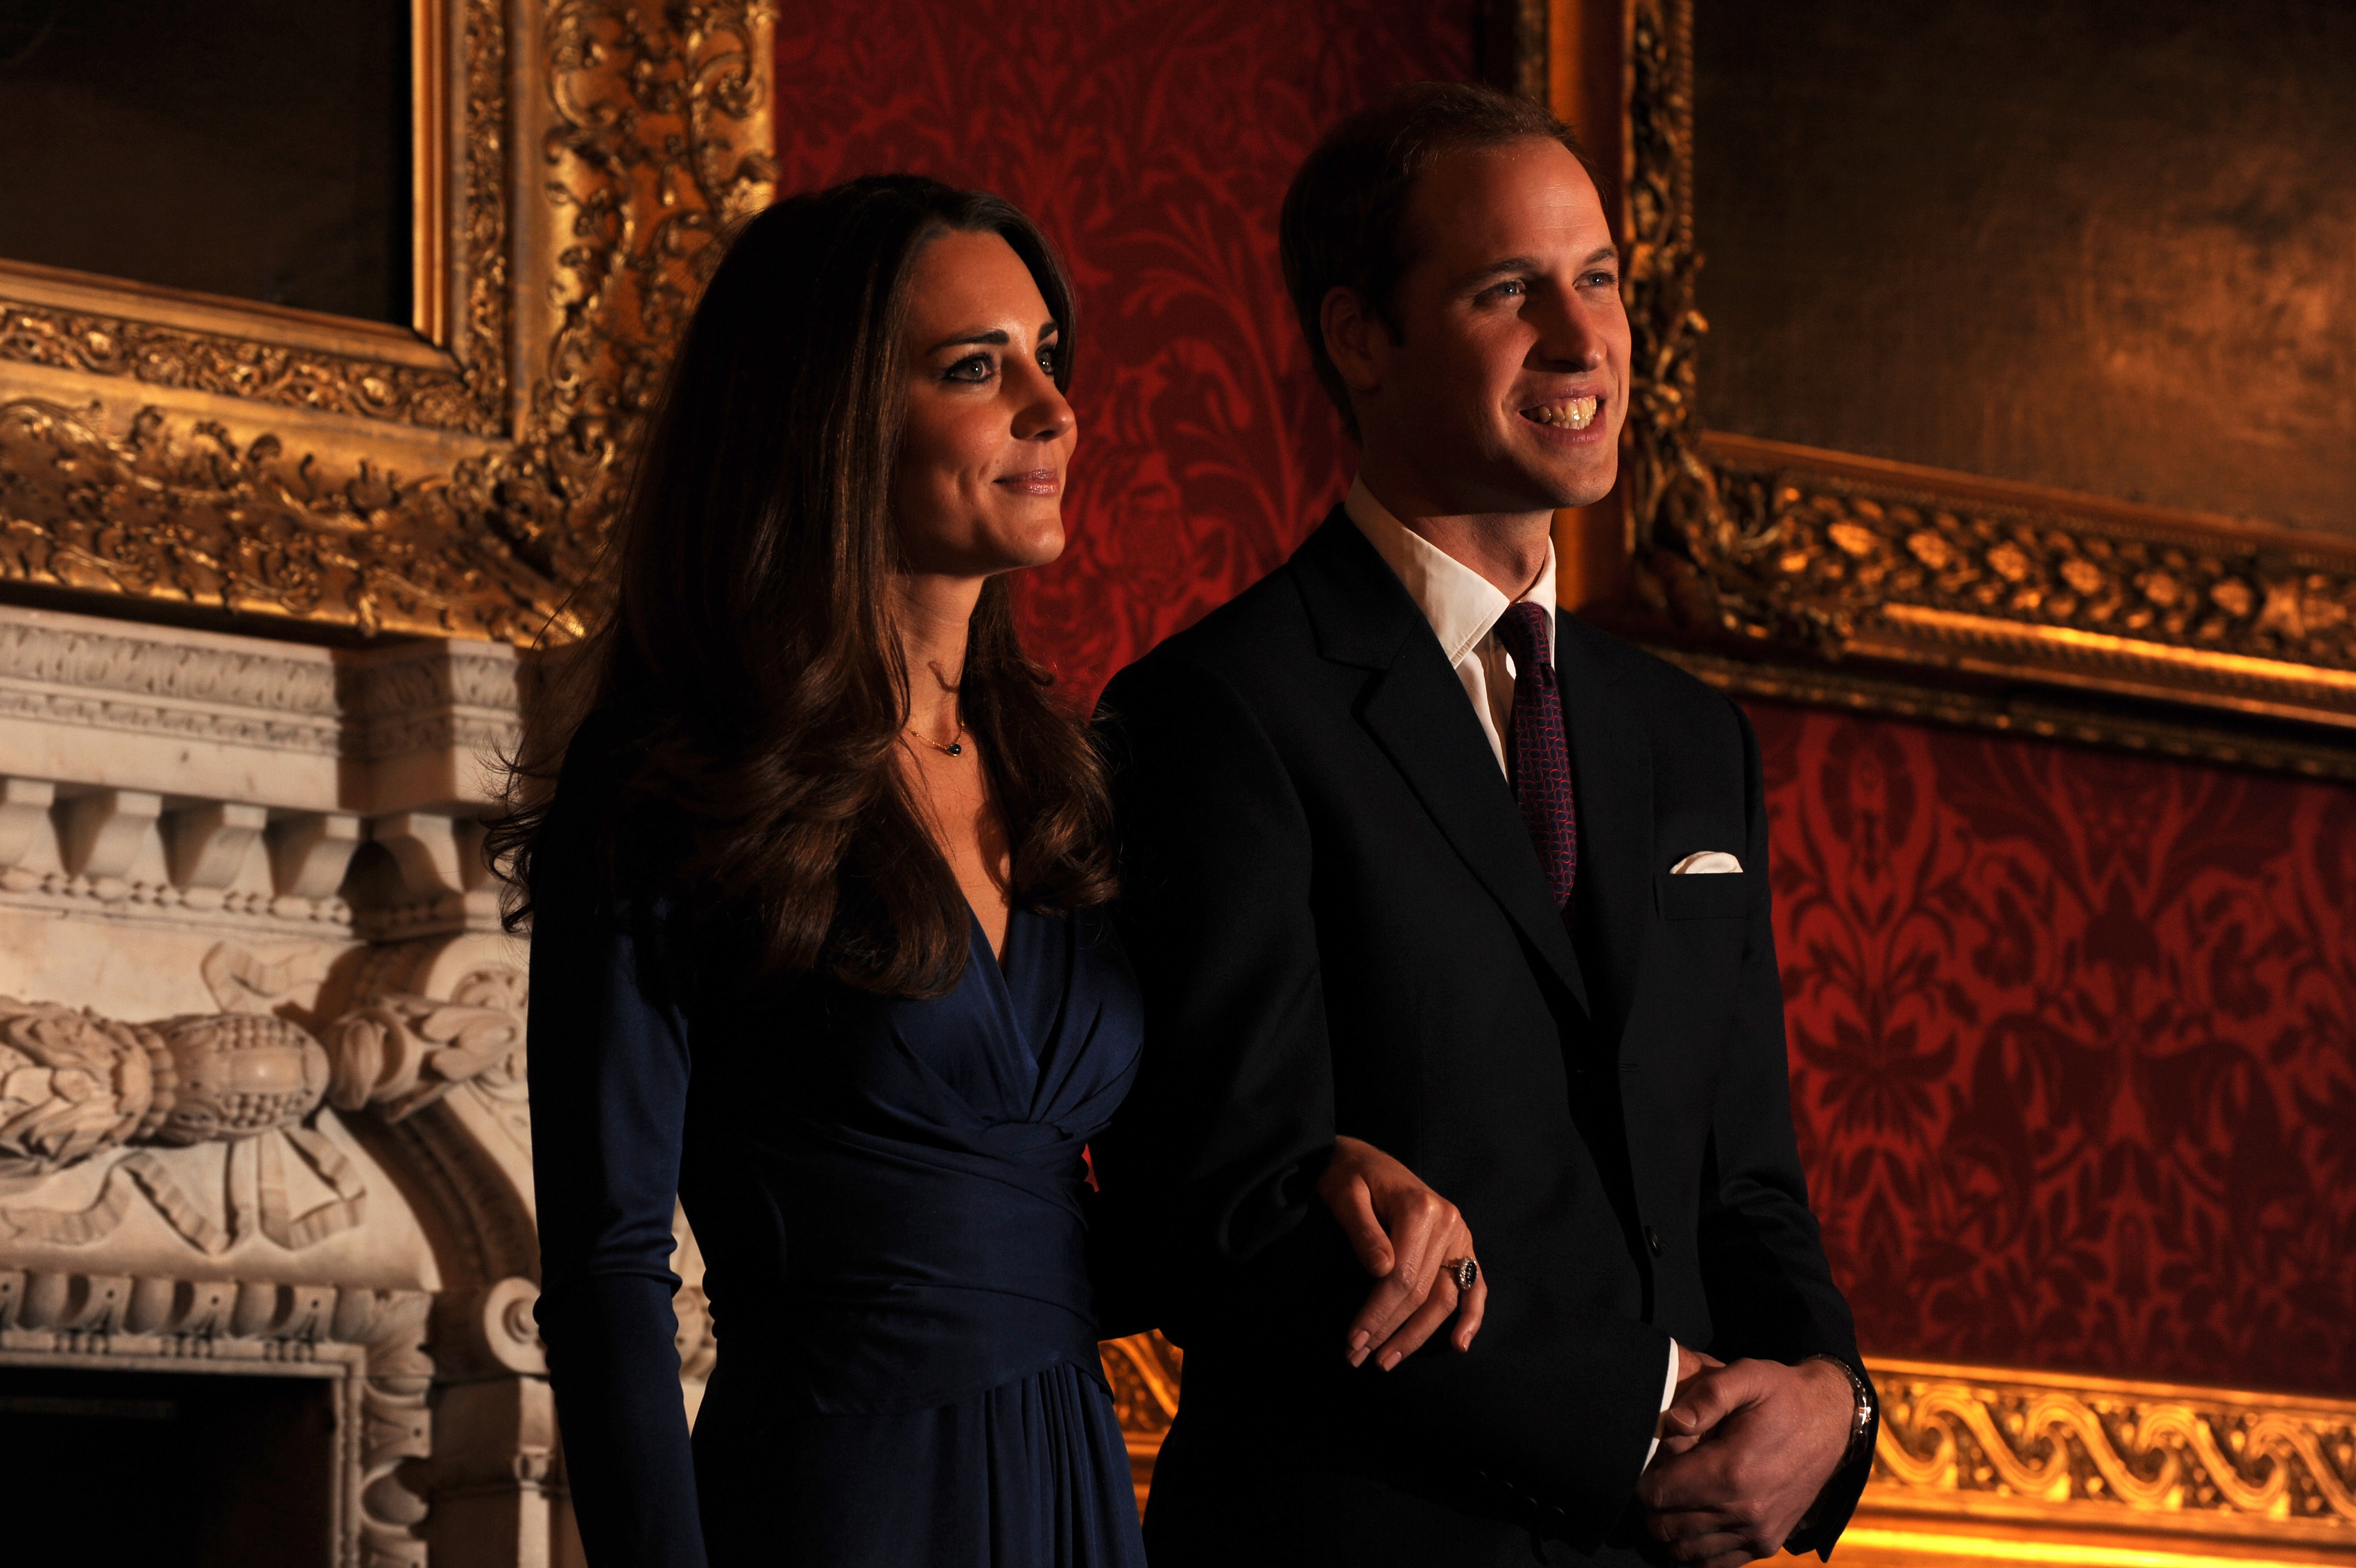 Prince William and Kate Middleton mark their engagement, in the State Rooms of St James' Palace, central London on November 16, 2010 | Source: Getty Images